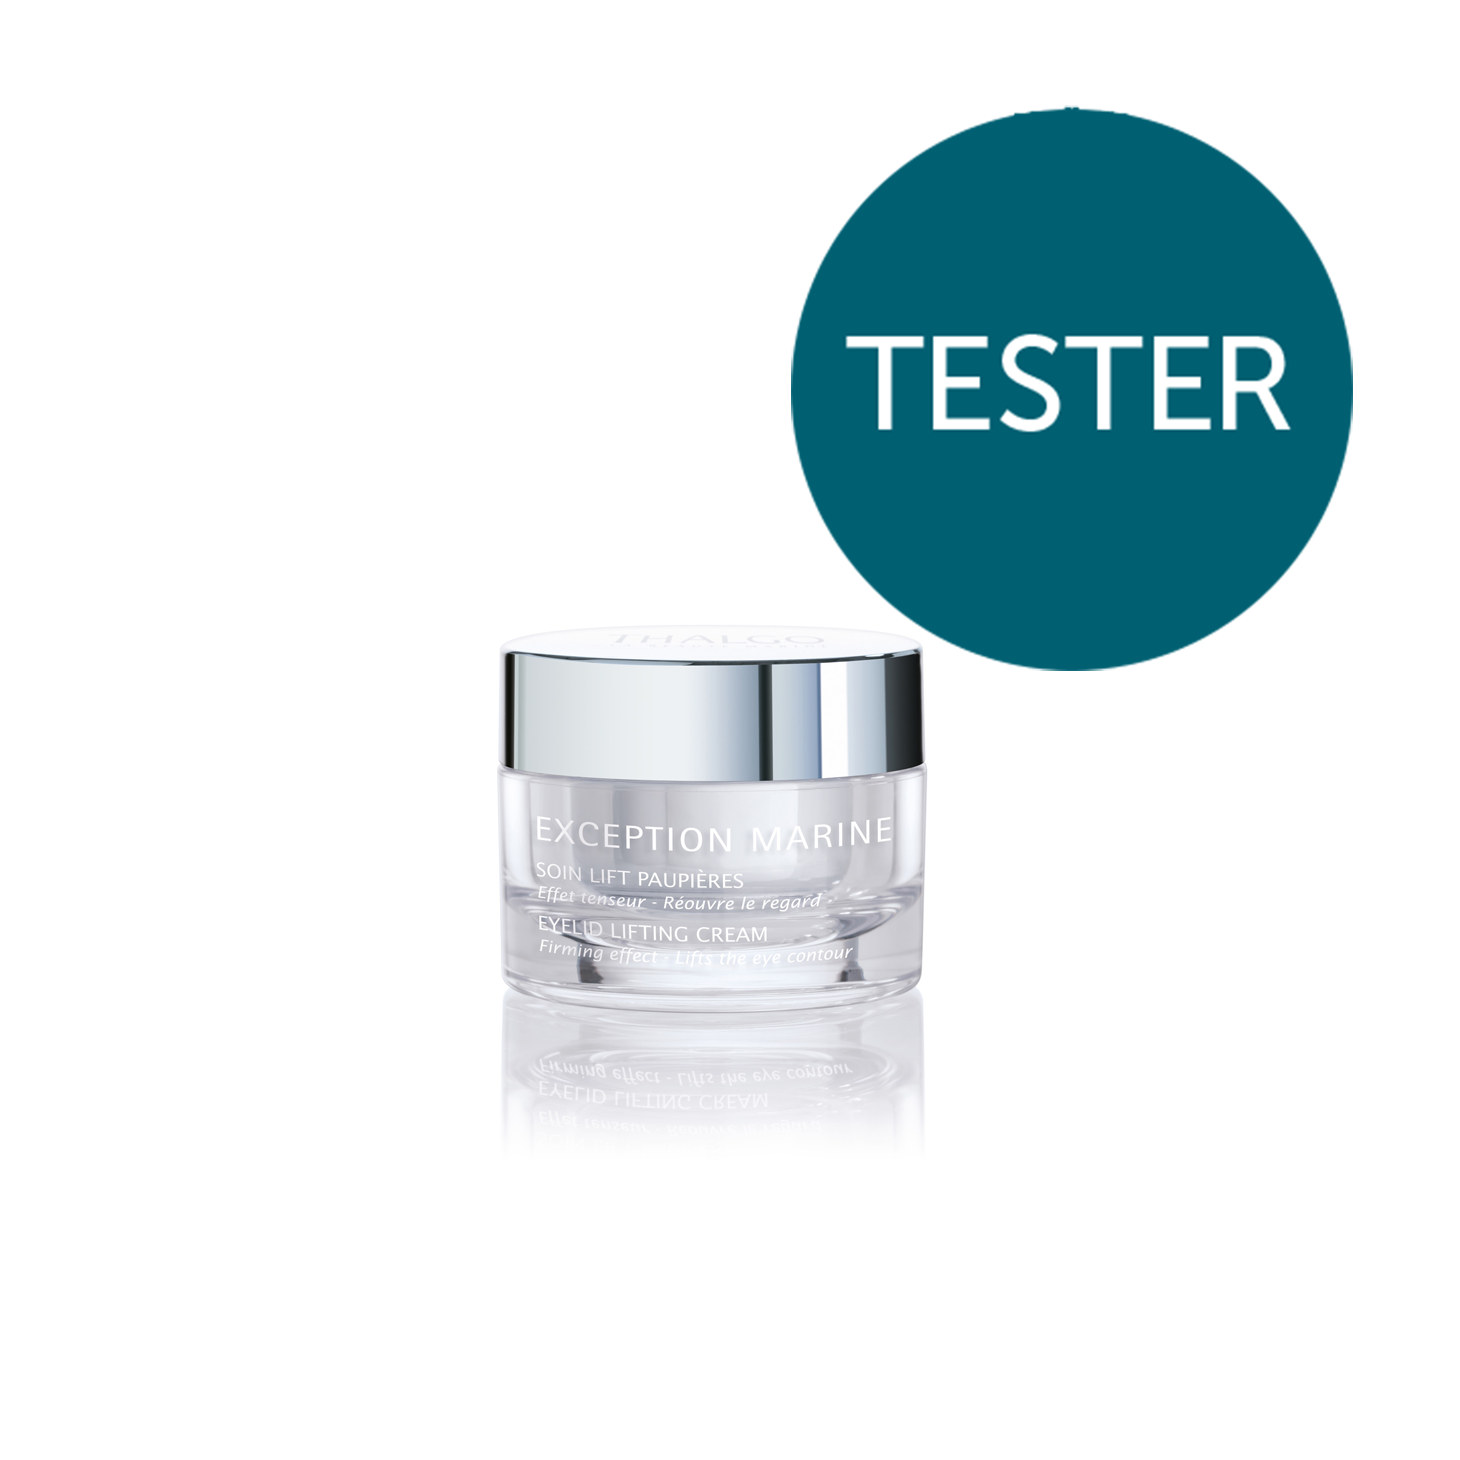 Exception Eyelid Lifting Cream (Tester)